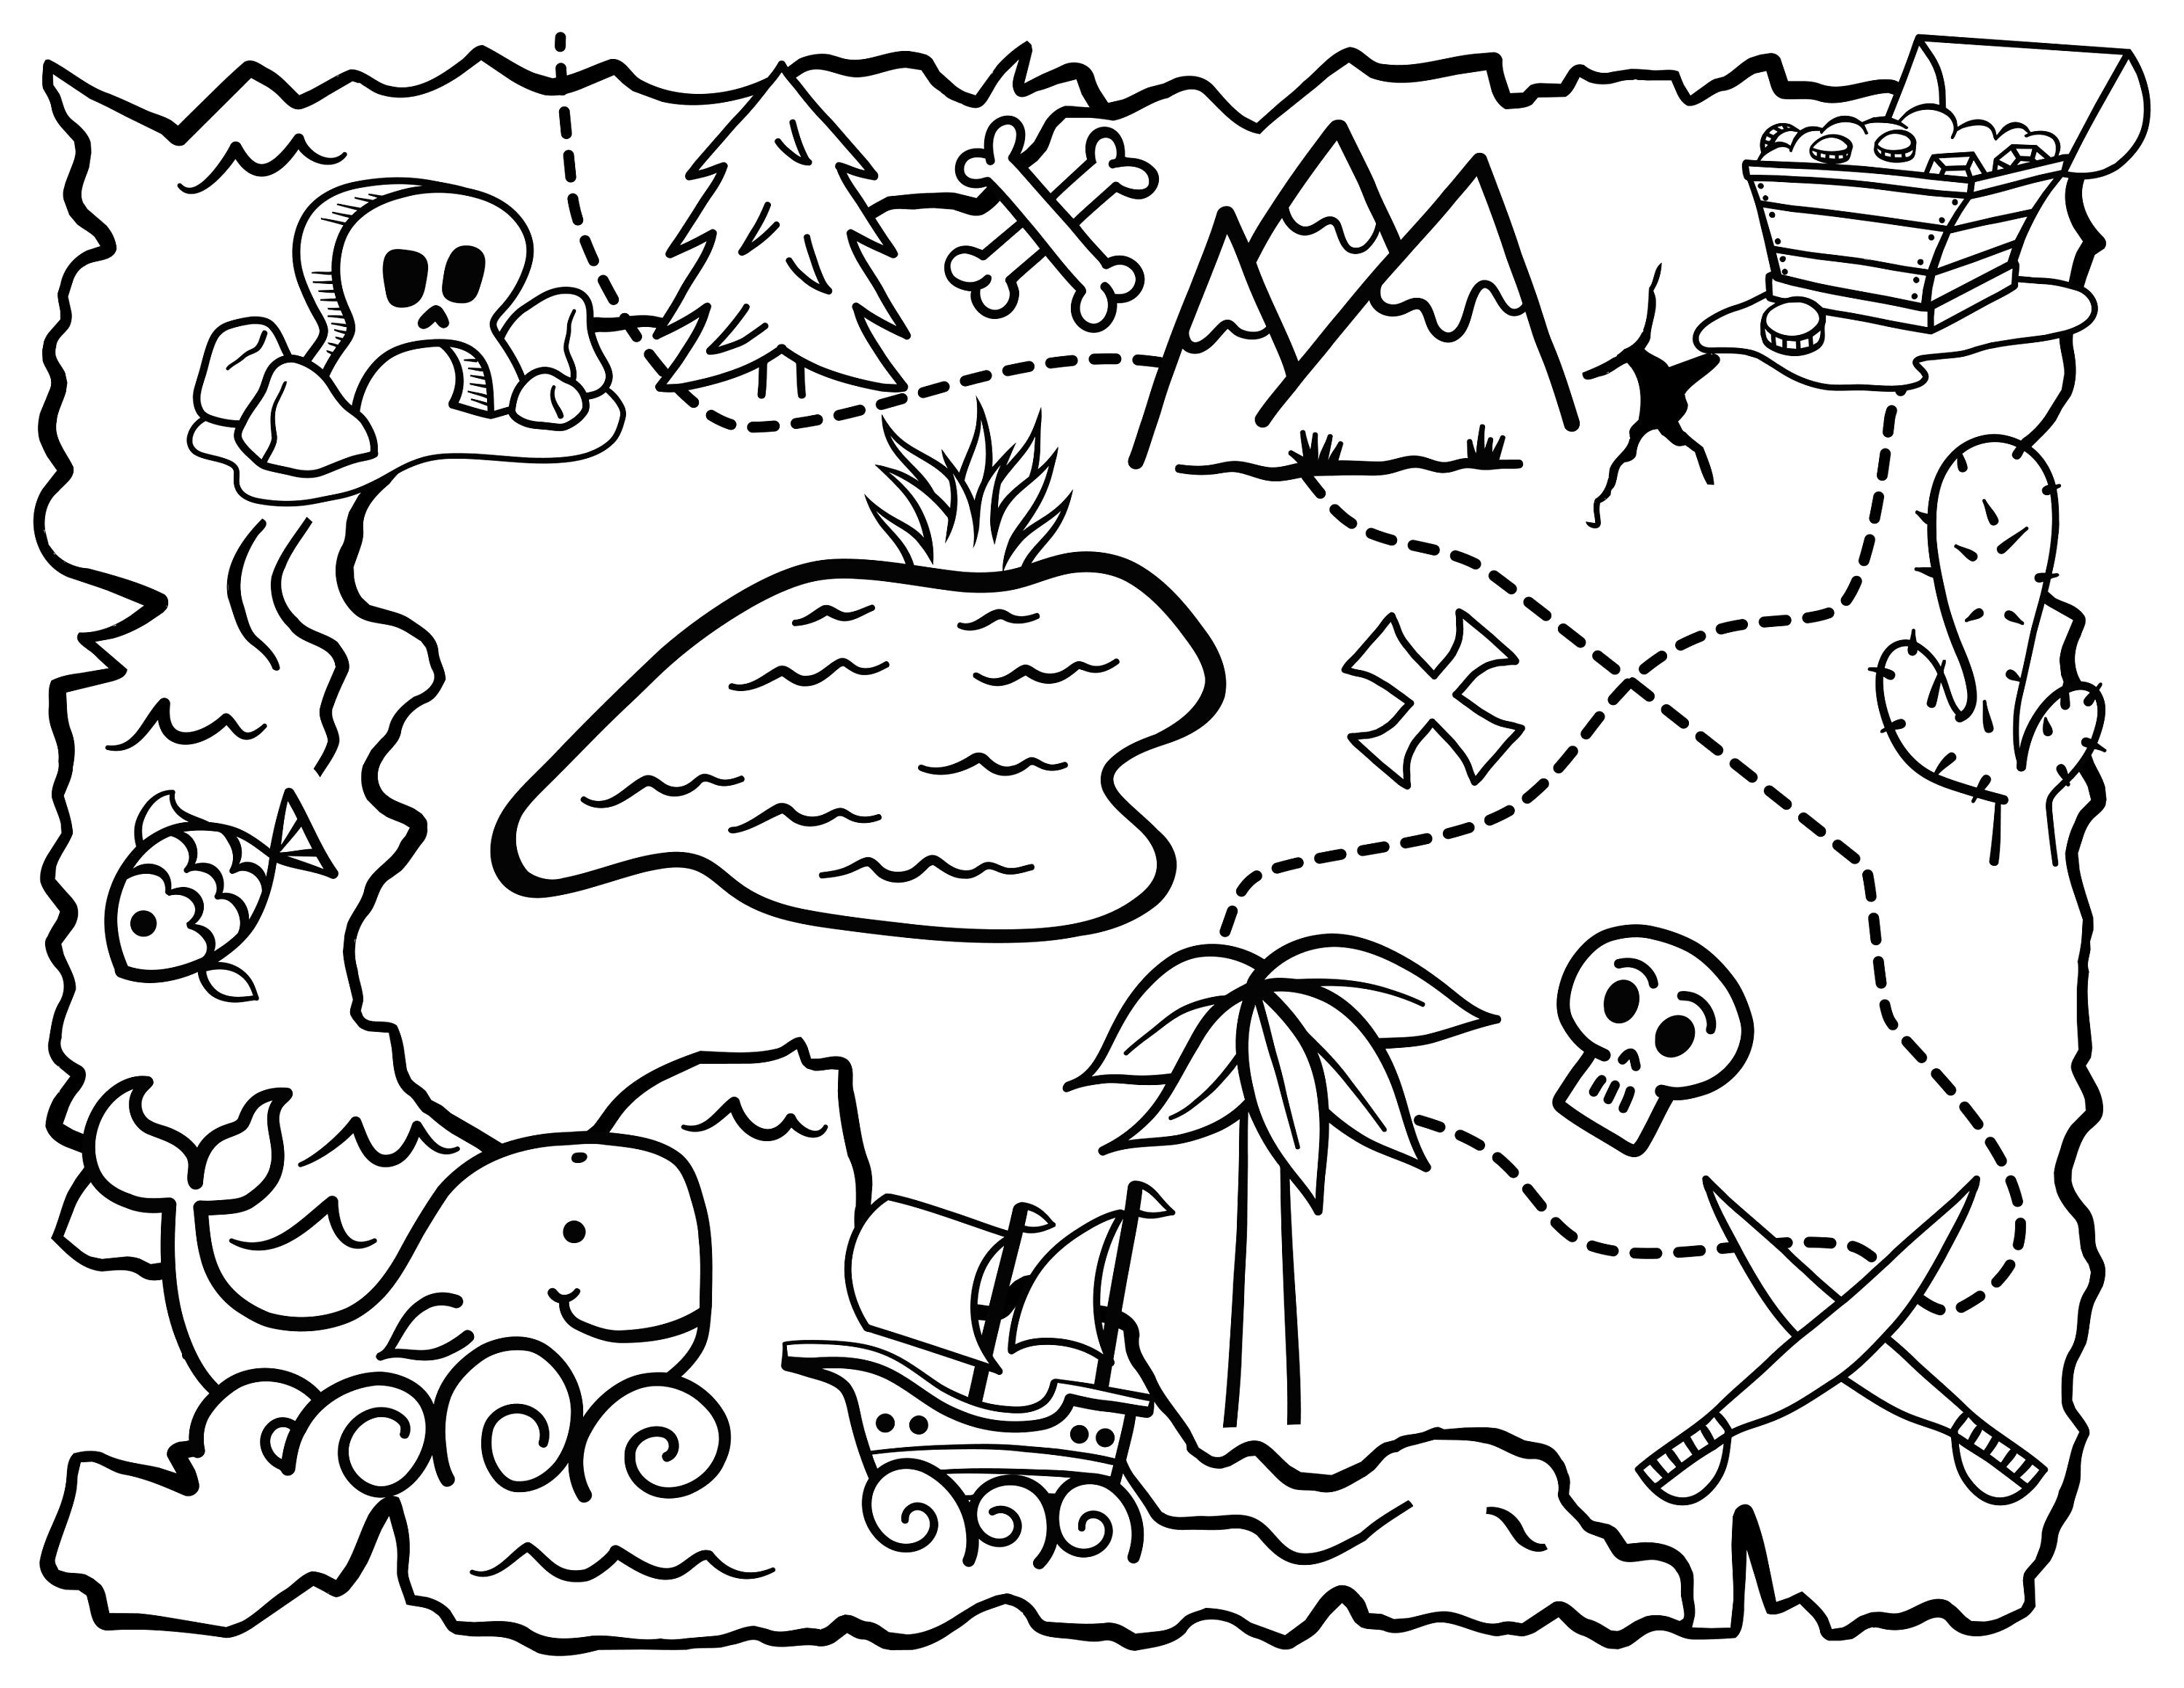 Pirate treasure map coloring pages pirate printable book digital download not a physical product